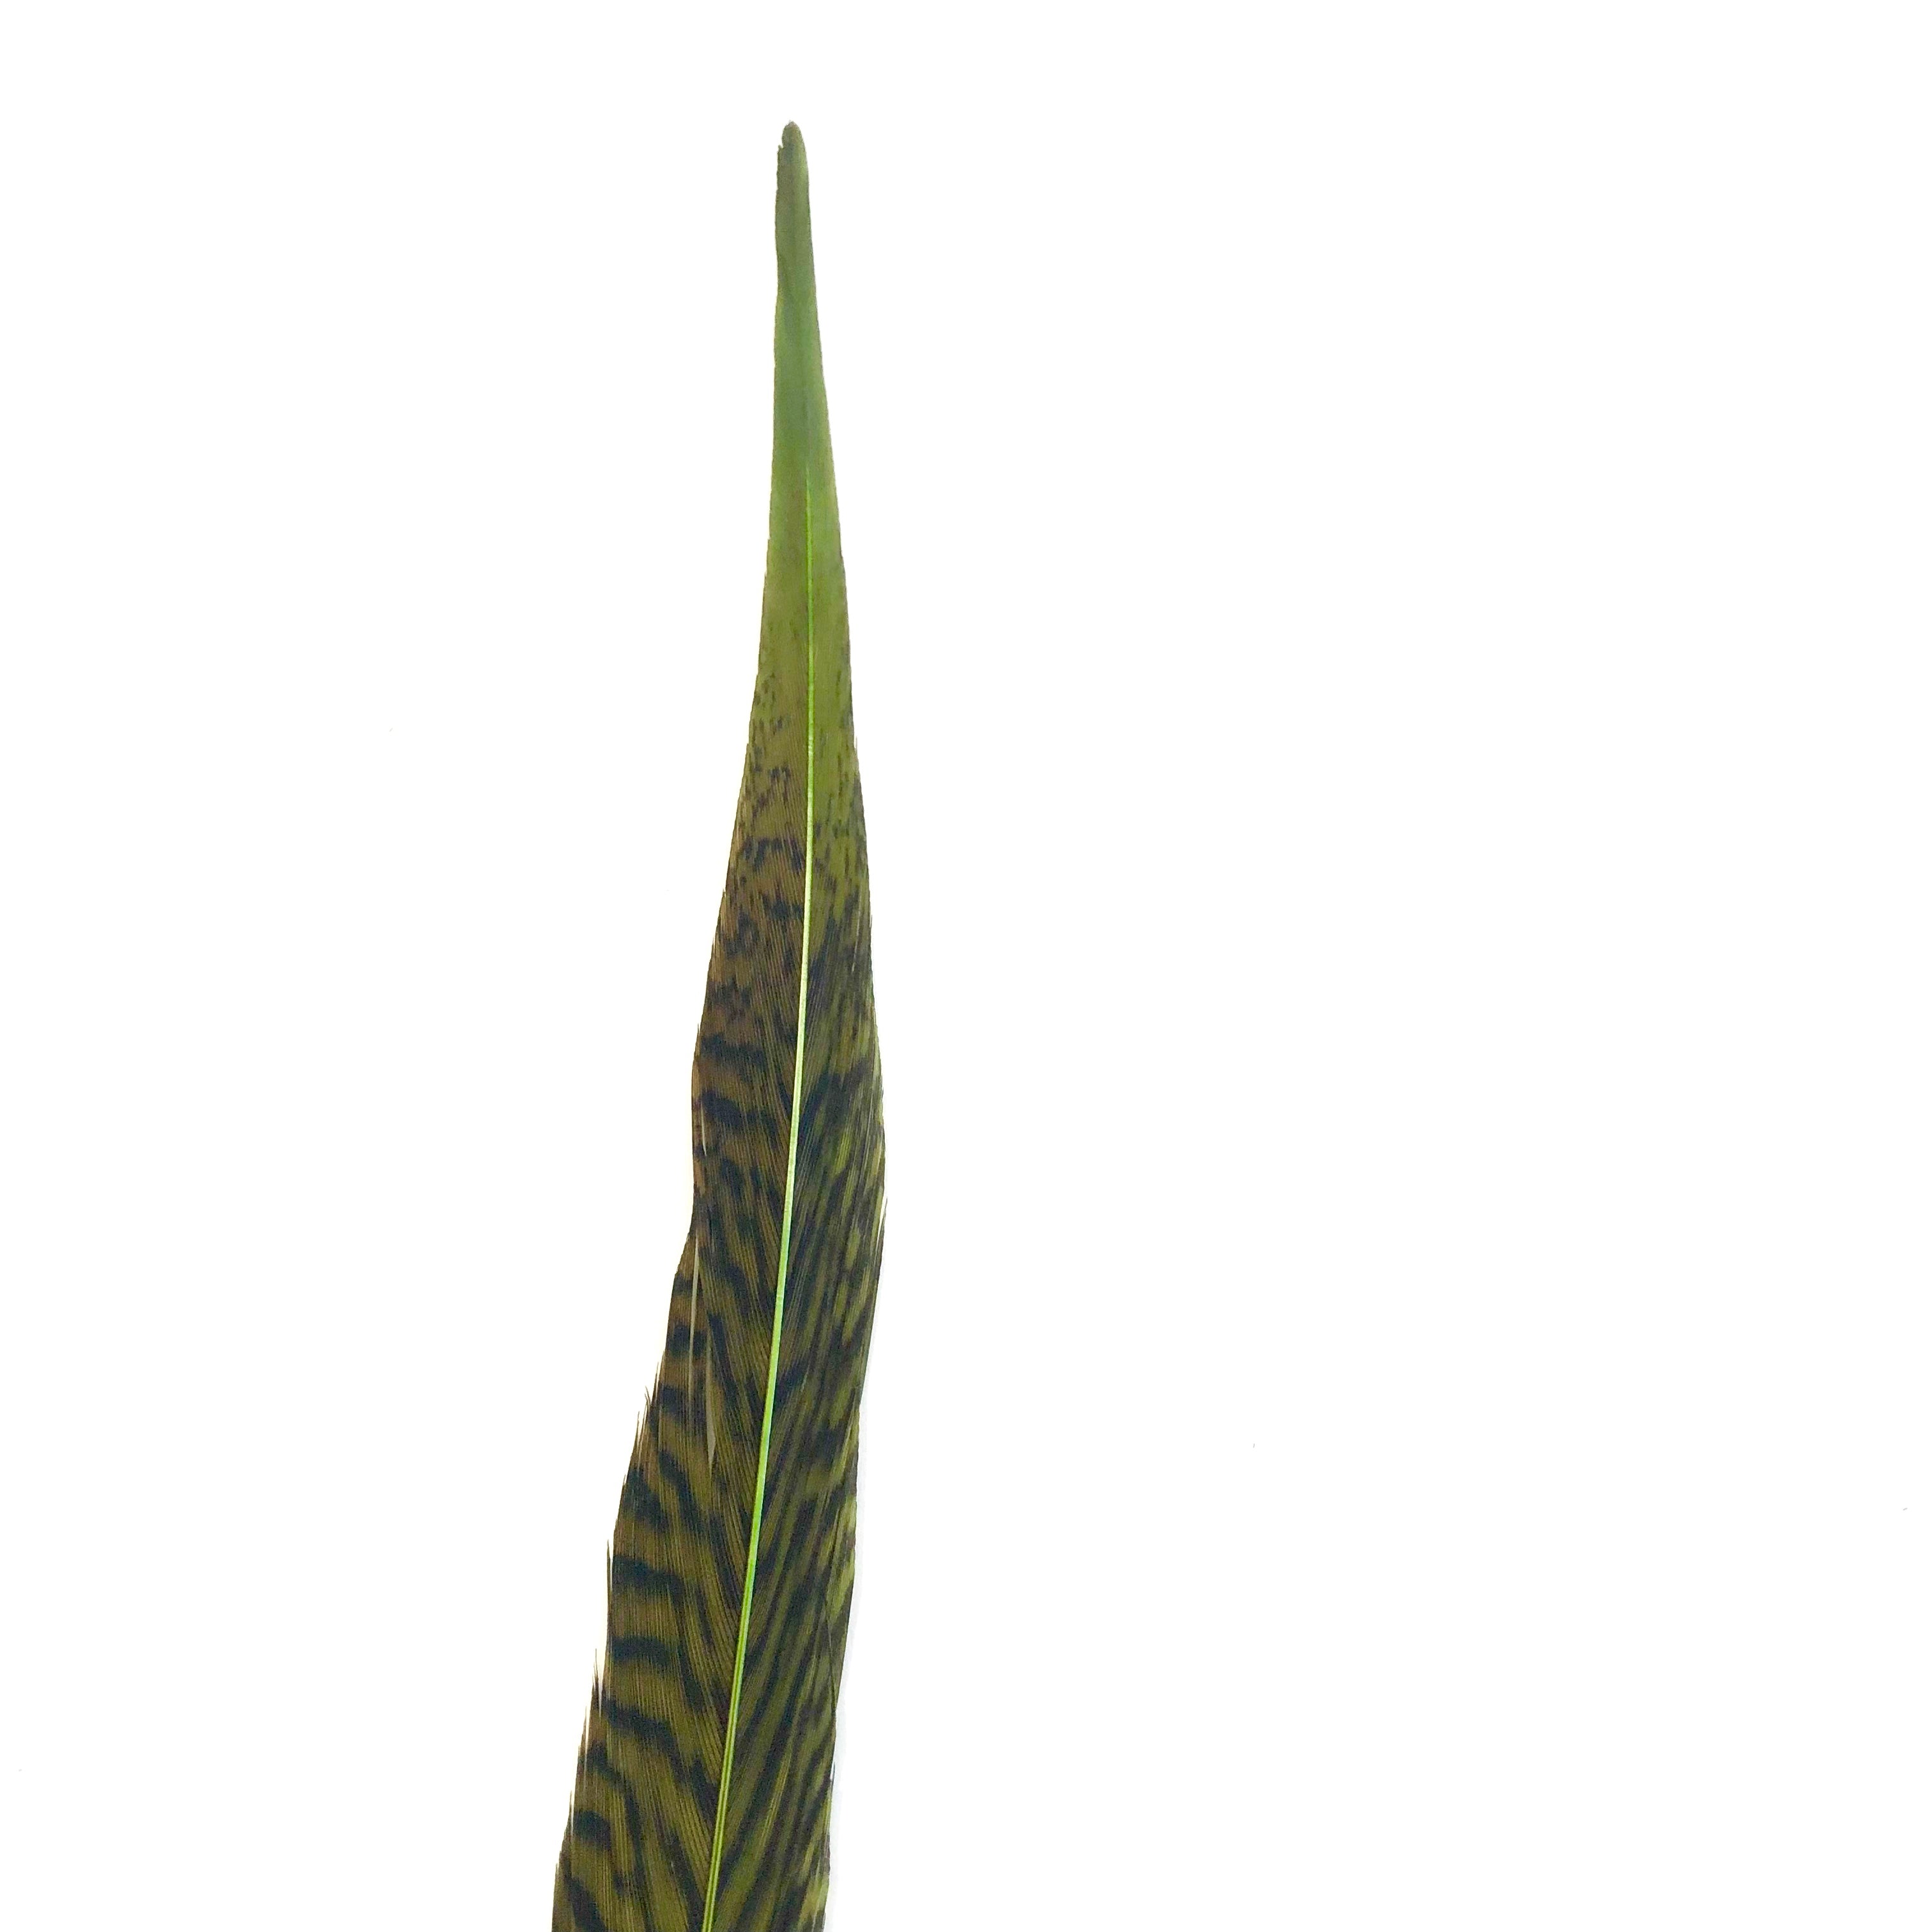 20" to 30" Golden Pheasant Side Tail Feather x 10 pcs - Olive Green ((BULK PACK))